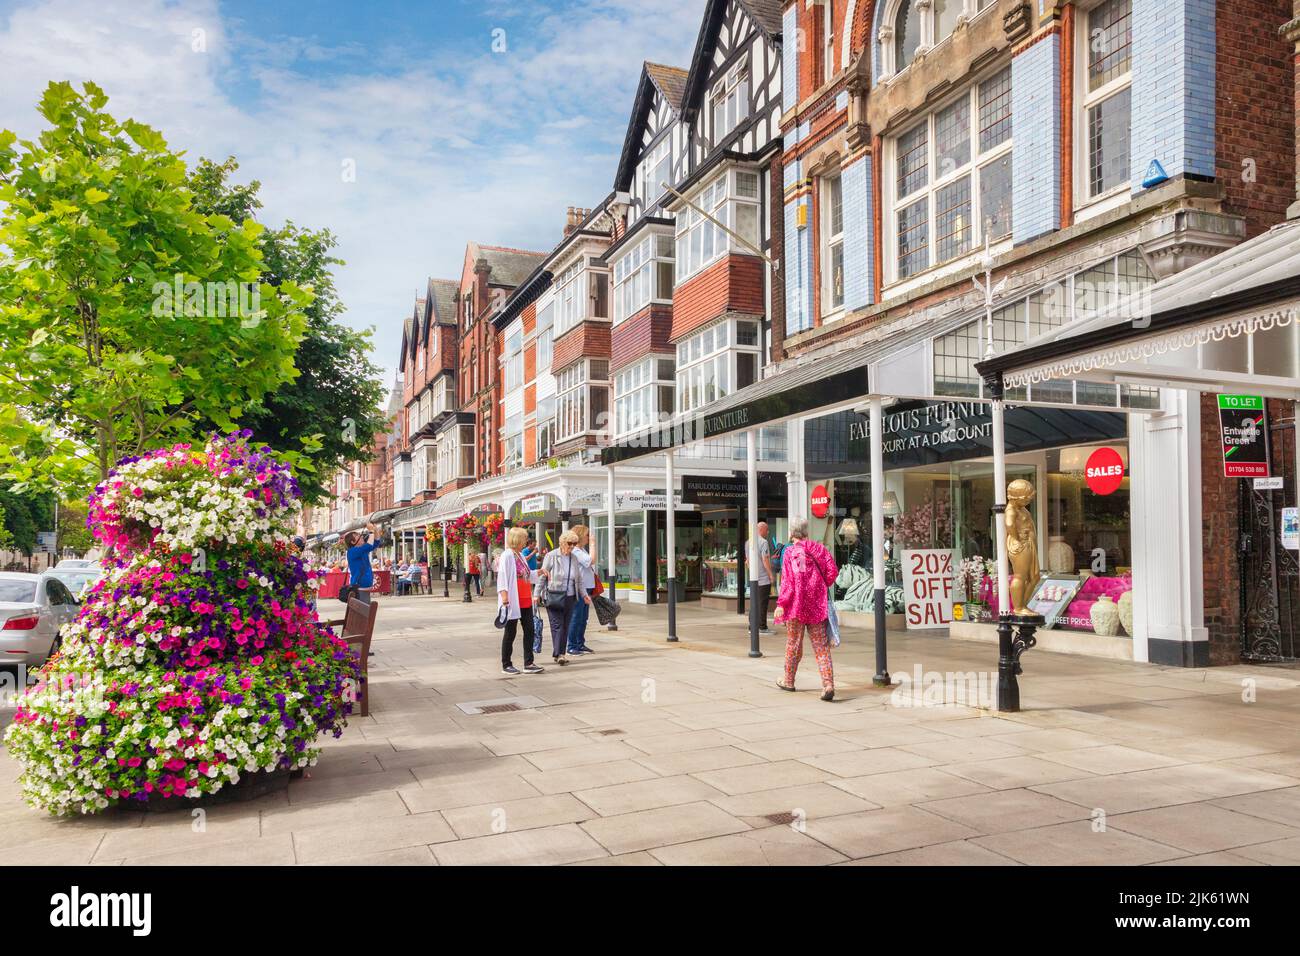 14 July 2019: Southport, Merseyside, UK - Women shopping in Lord Street, the main shopping street in the town. Stock Photo